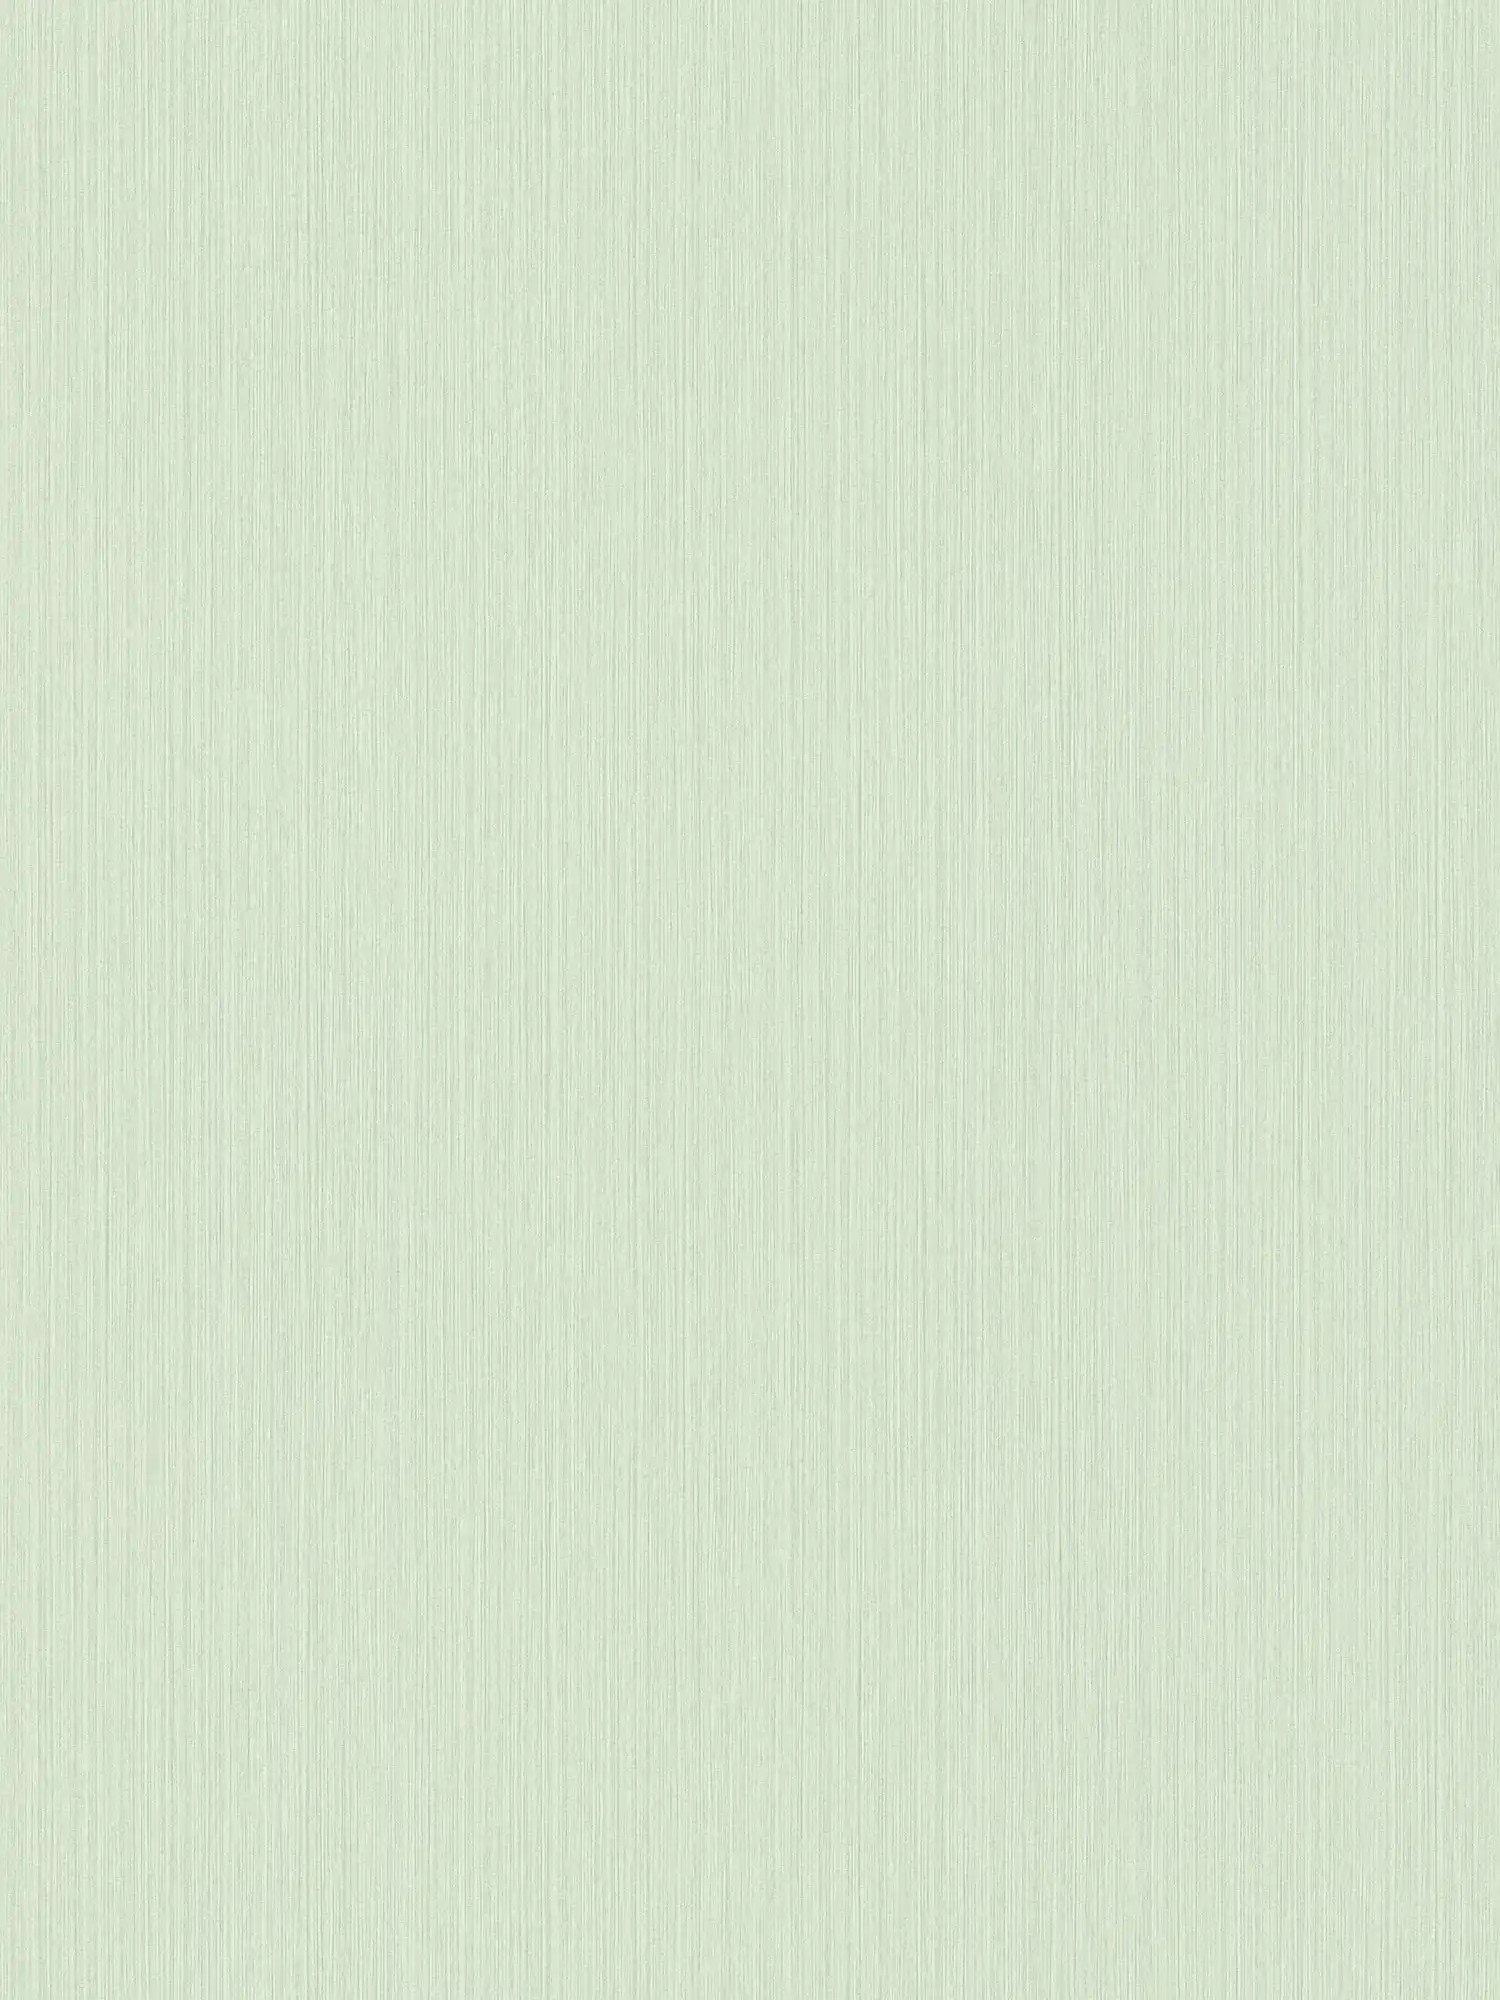 Plain wallpaper light green with mottled textile effect by MICHALSKY
